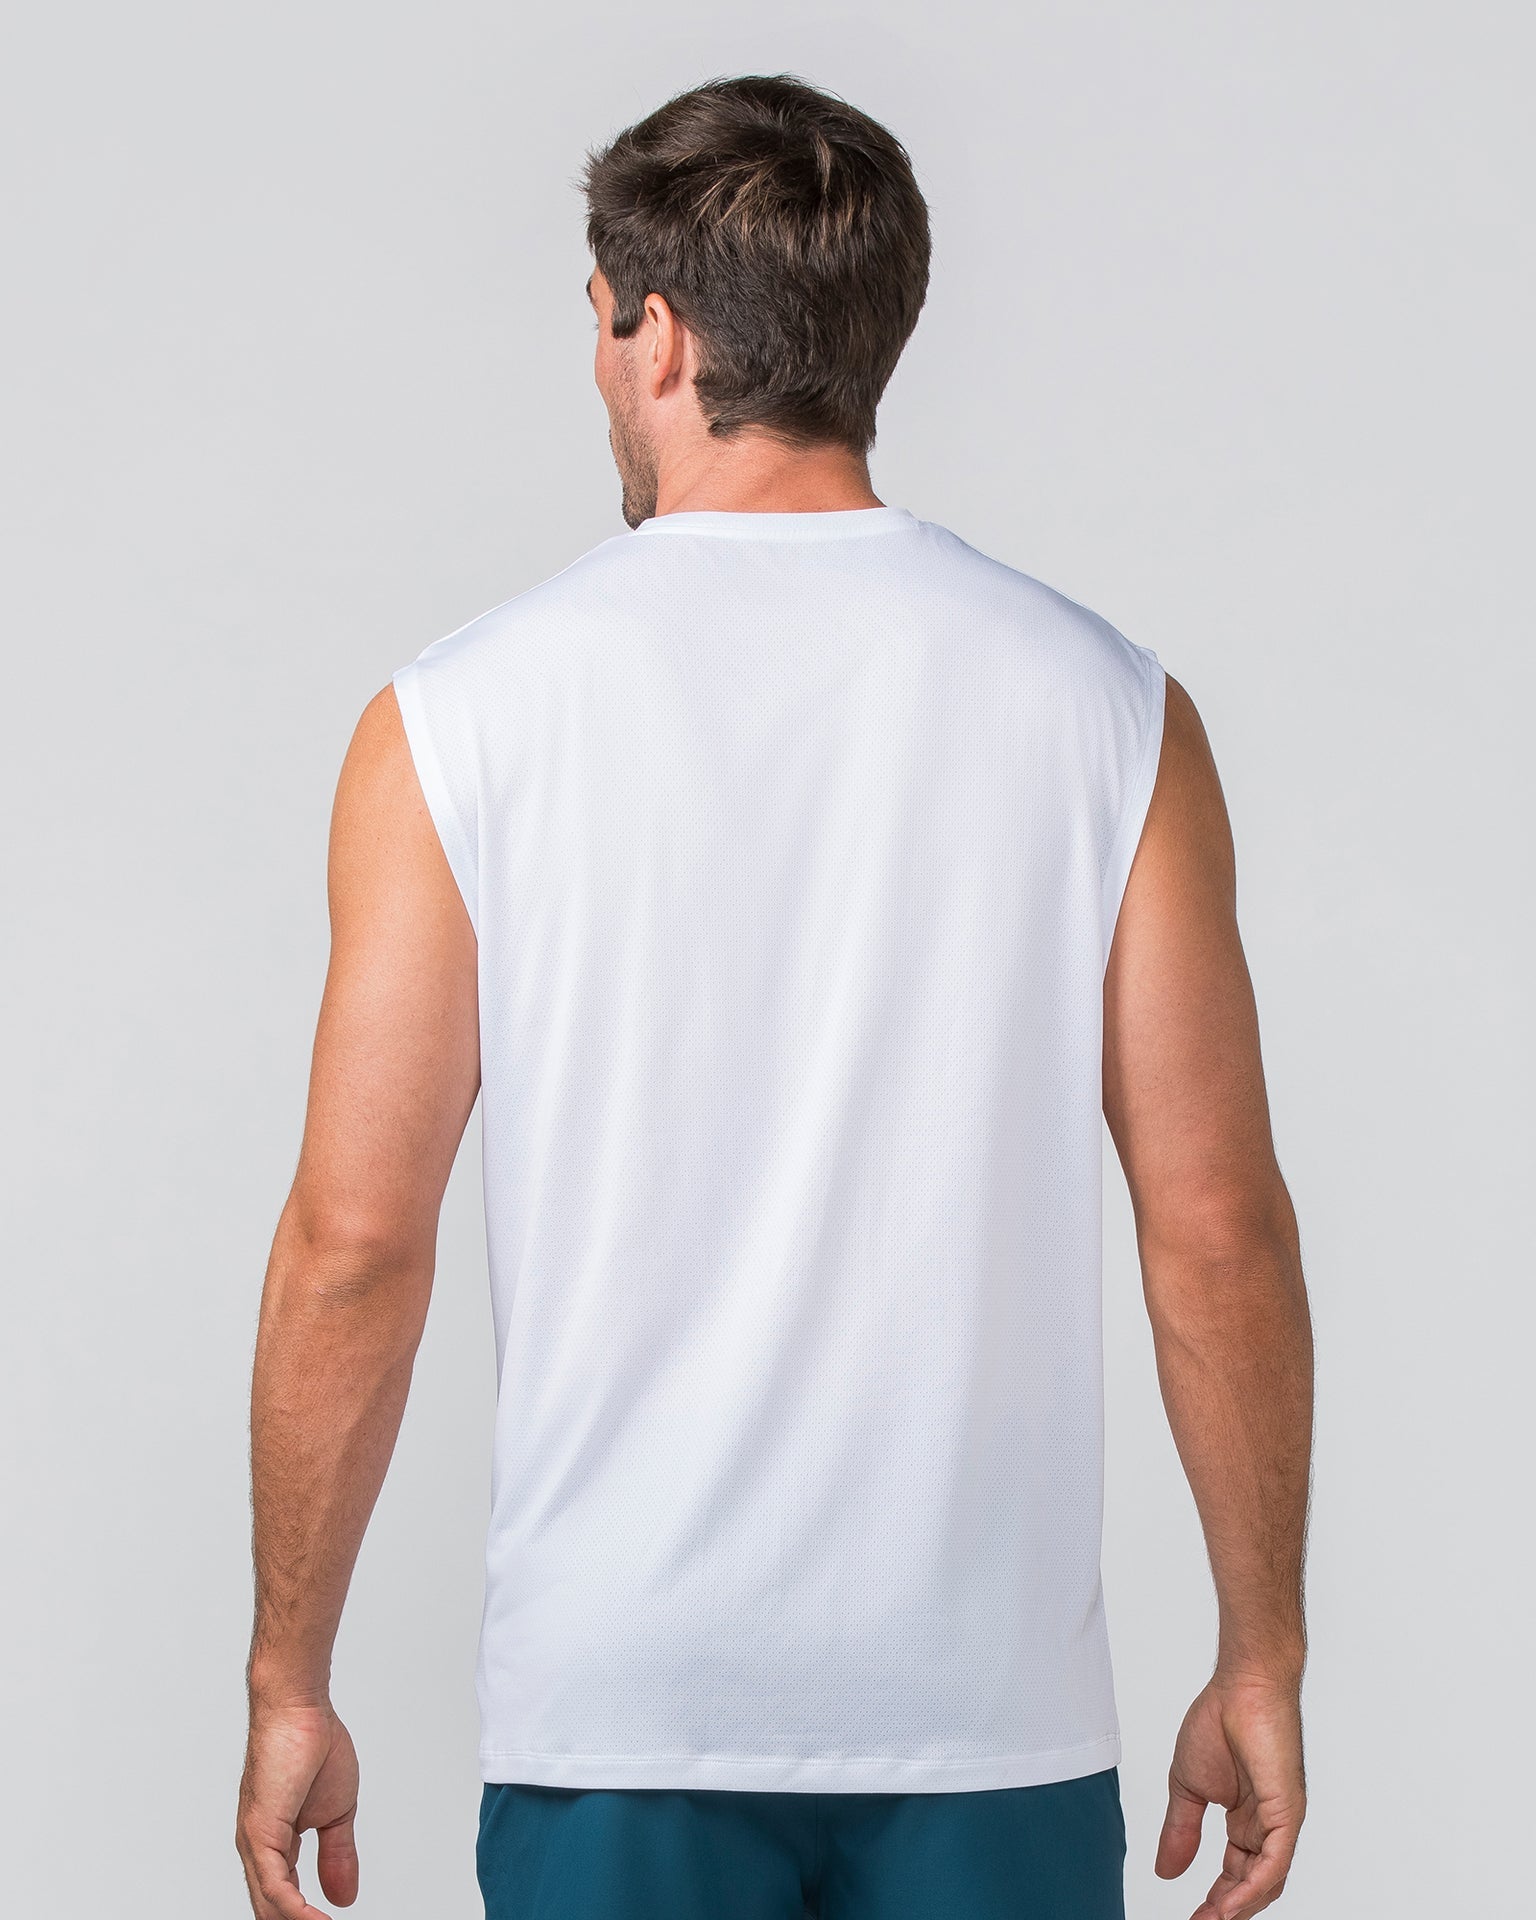 Muscle Nation Tank Tops Relaxed Active Tank - White